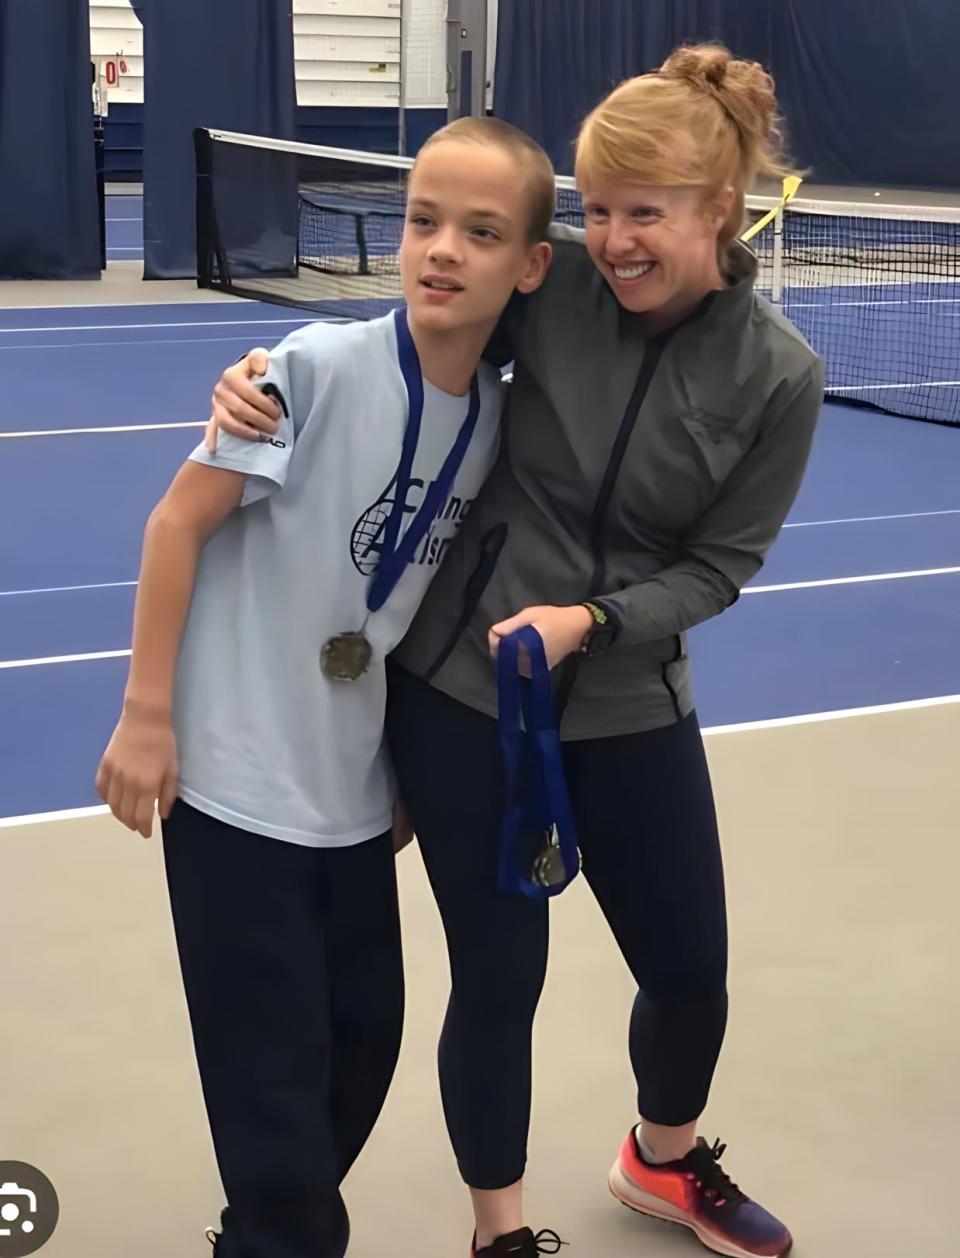 Katie Orlando with one of the children she works with in the ACEing Autism program at Towpath Tennis Center in Akron.